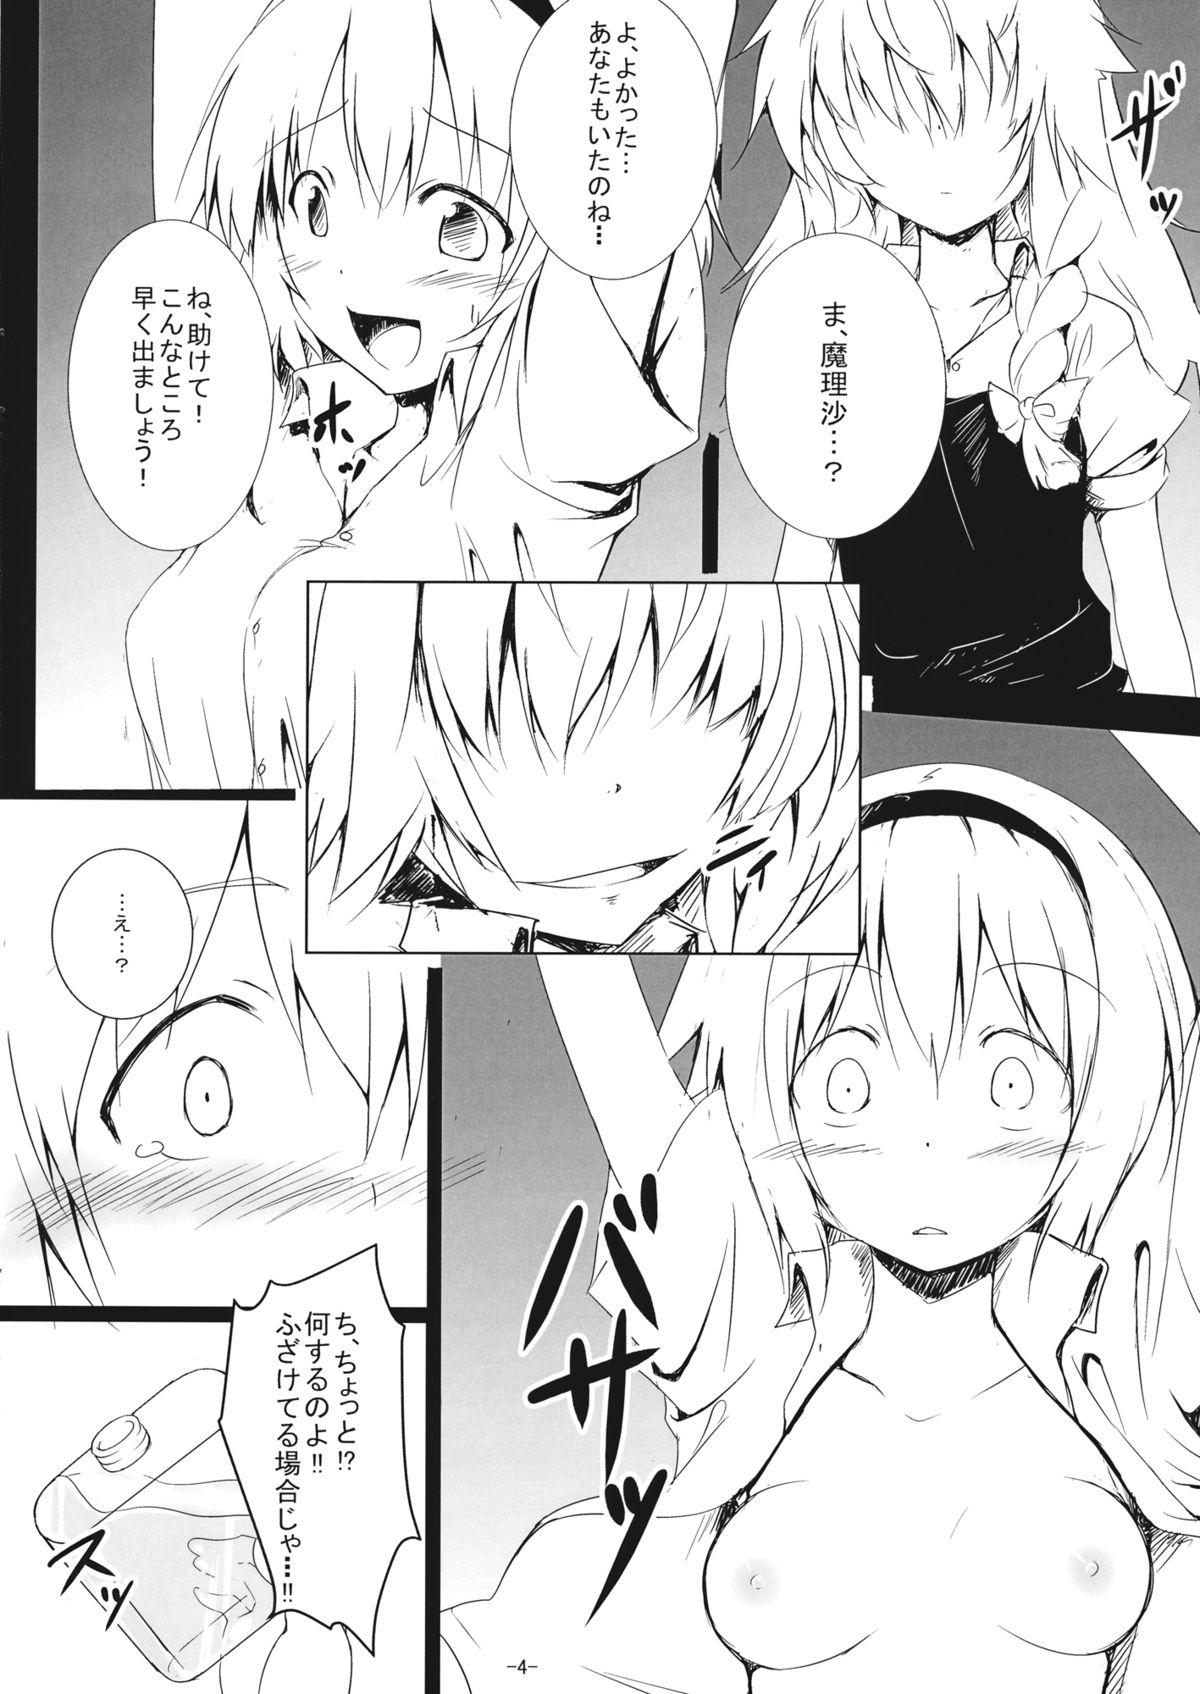 Pene Alice in Nightmare - Touhou project Creampies - Page 3